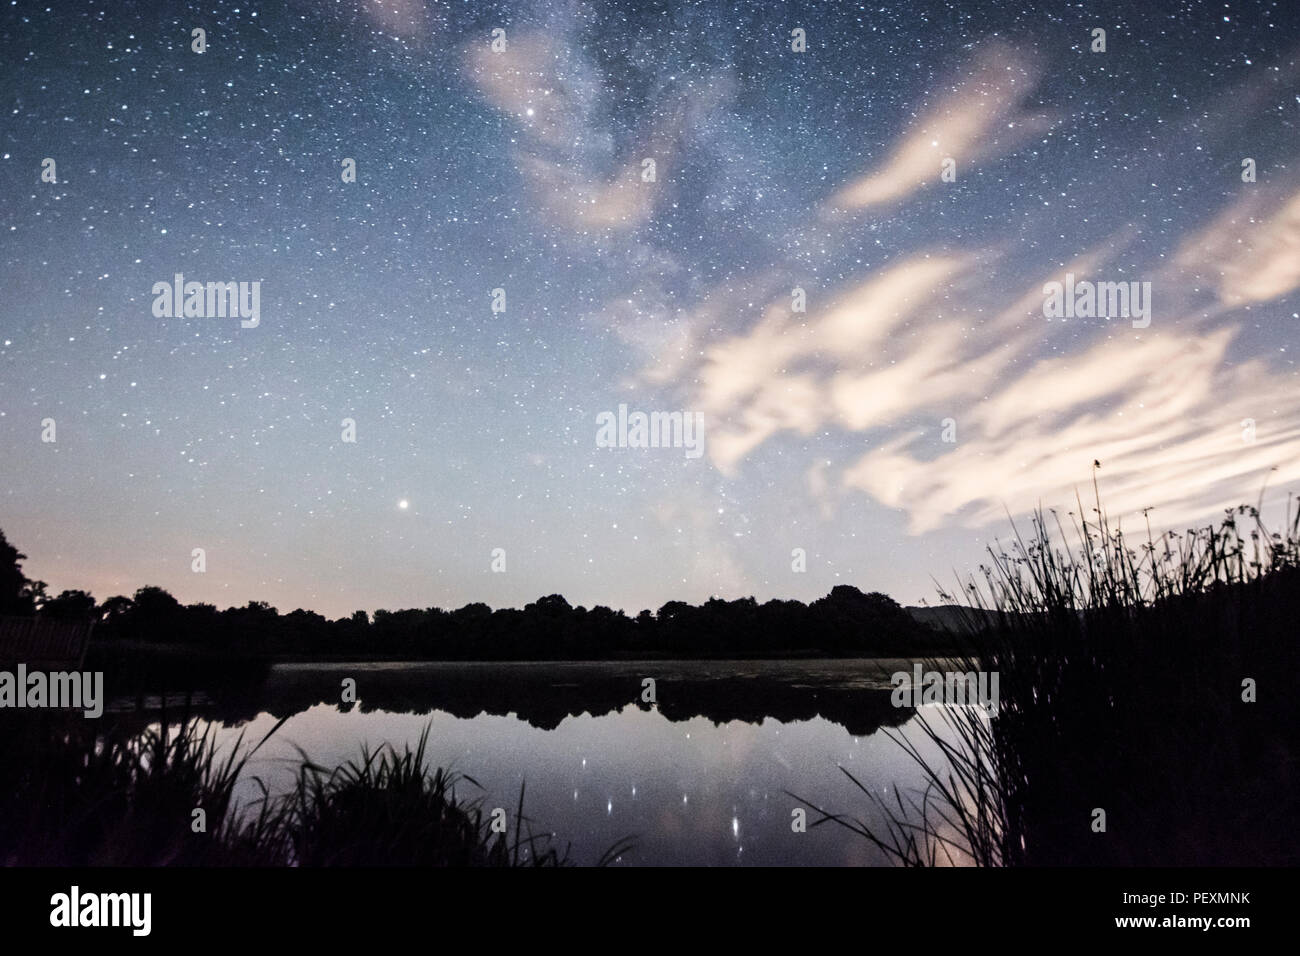 The Milky Way galaxy seen over Burton Mill Pond, thin wispy clouds, The South Downs National Park, Petworth, Sussex, UK. August. Night. Stock Photo